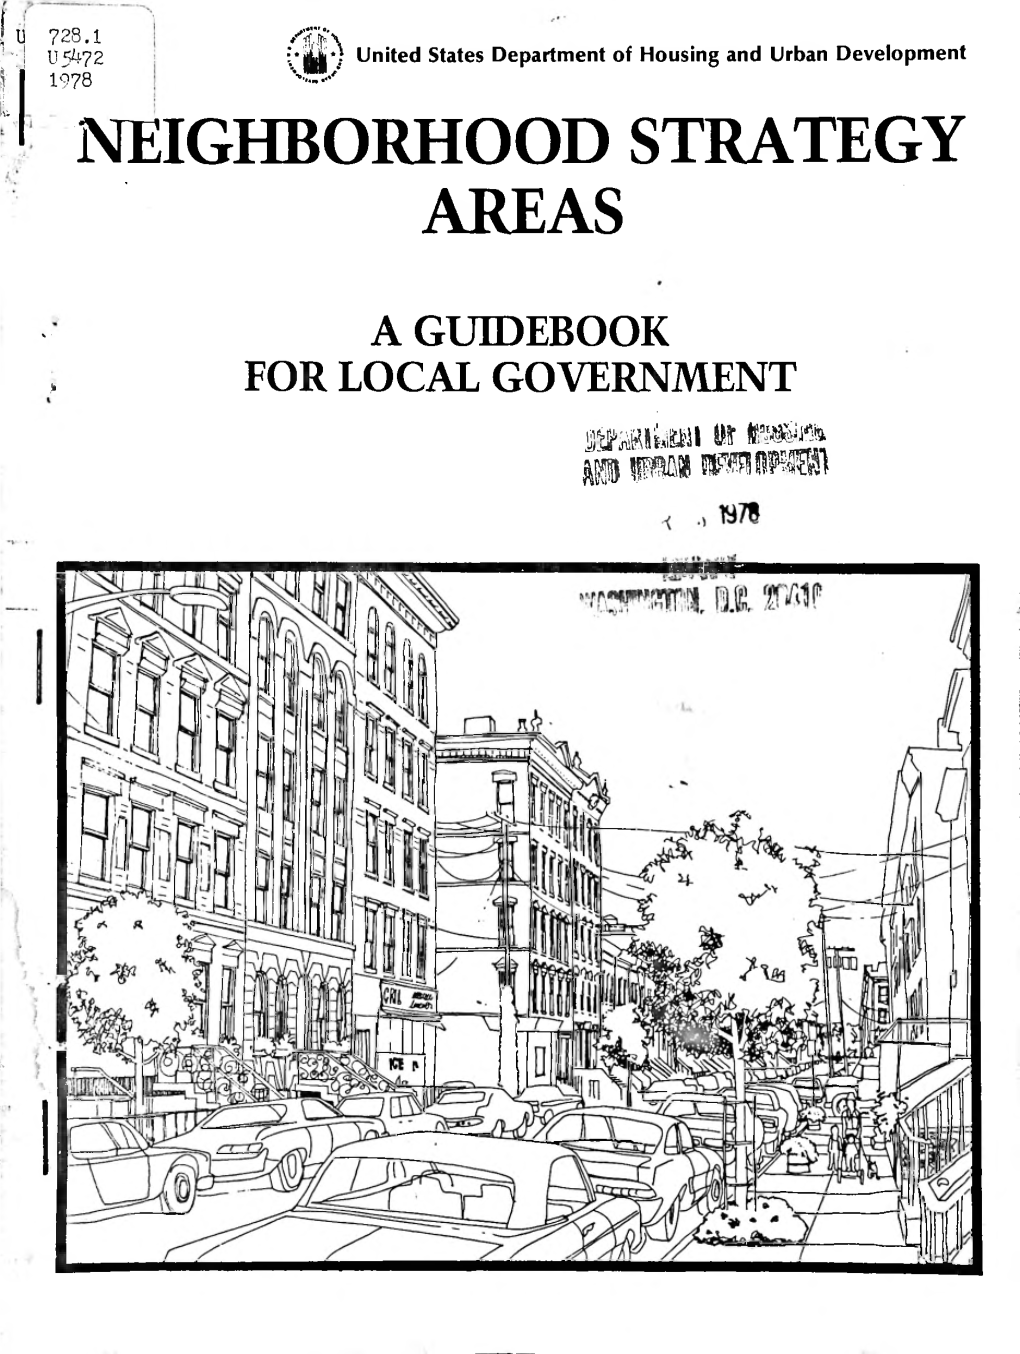 Neighborhood Strategy Areas a Guidebook for Local Government